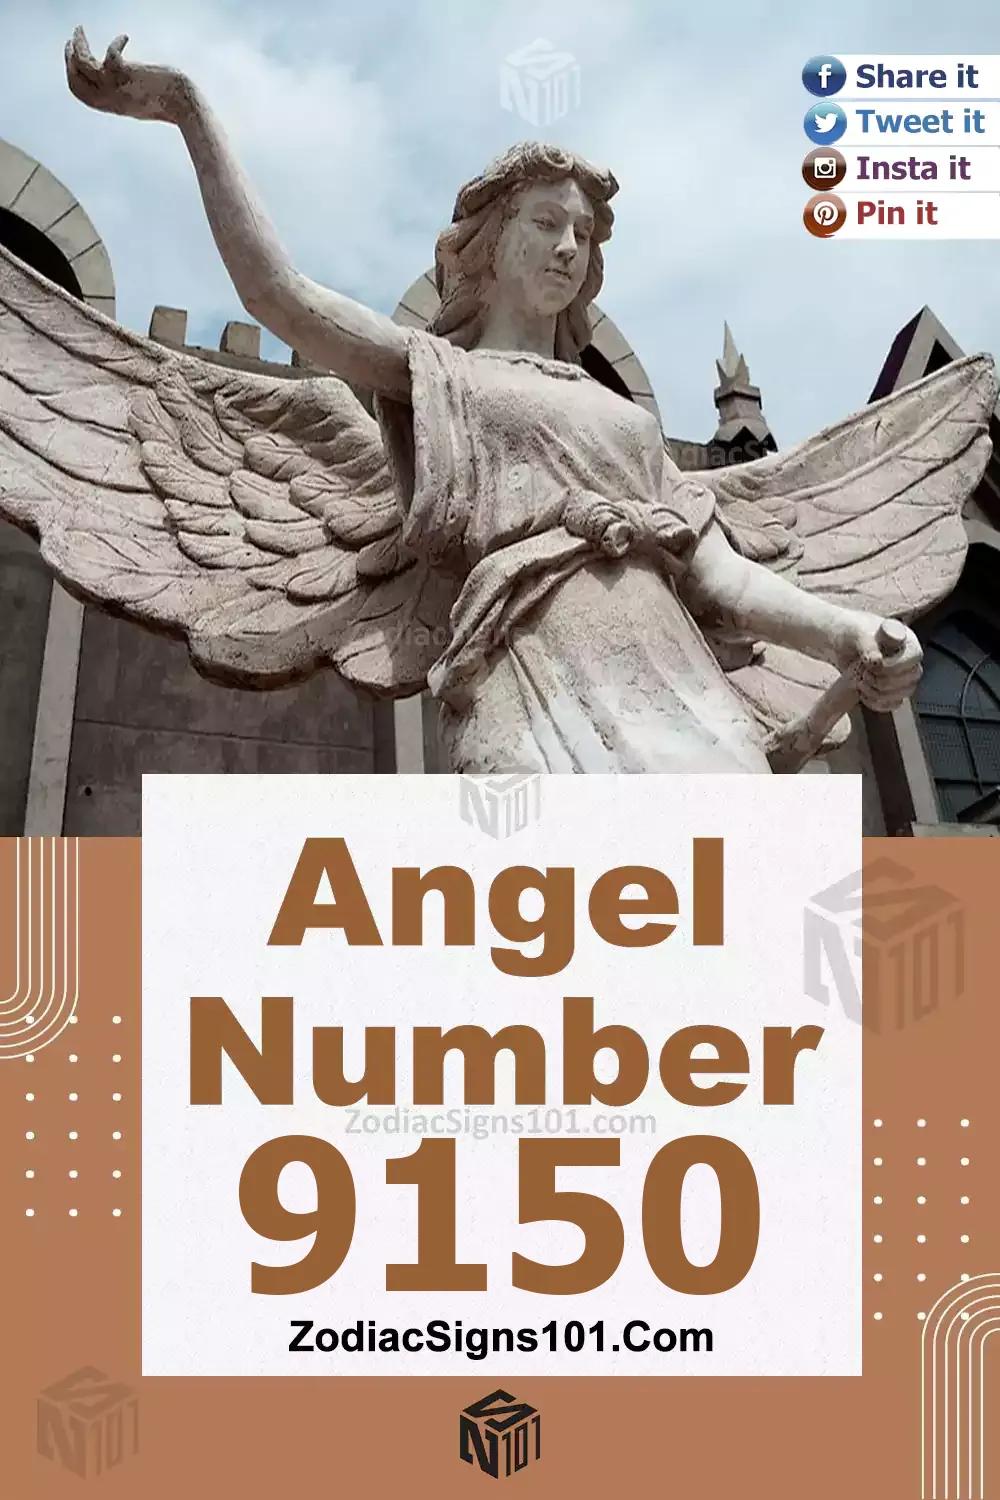 9150 Angel Number Meaning